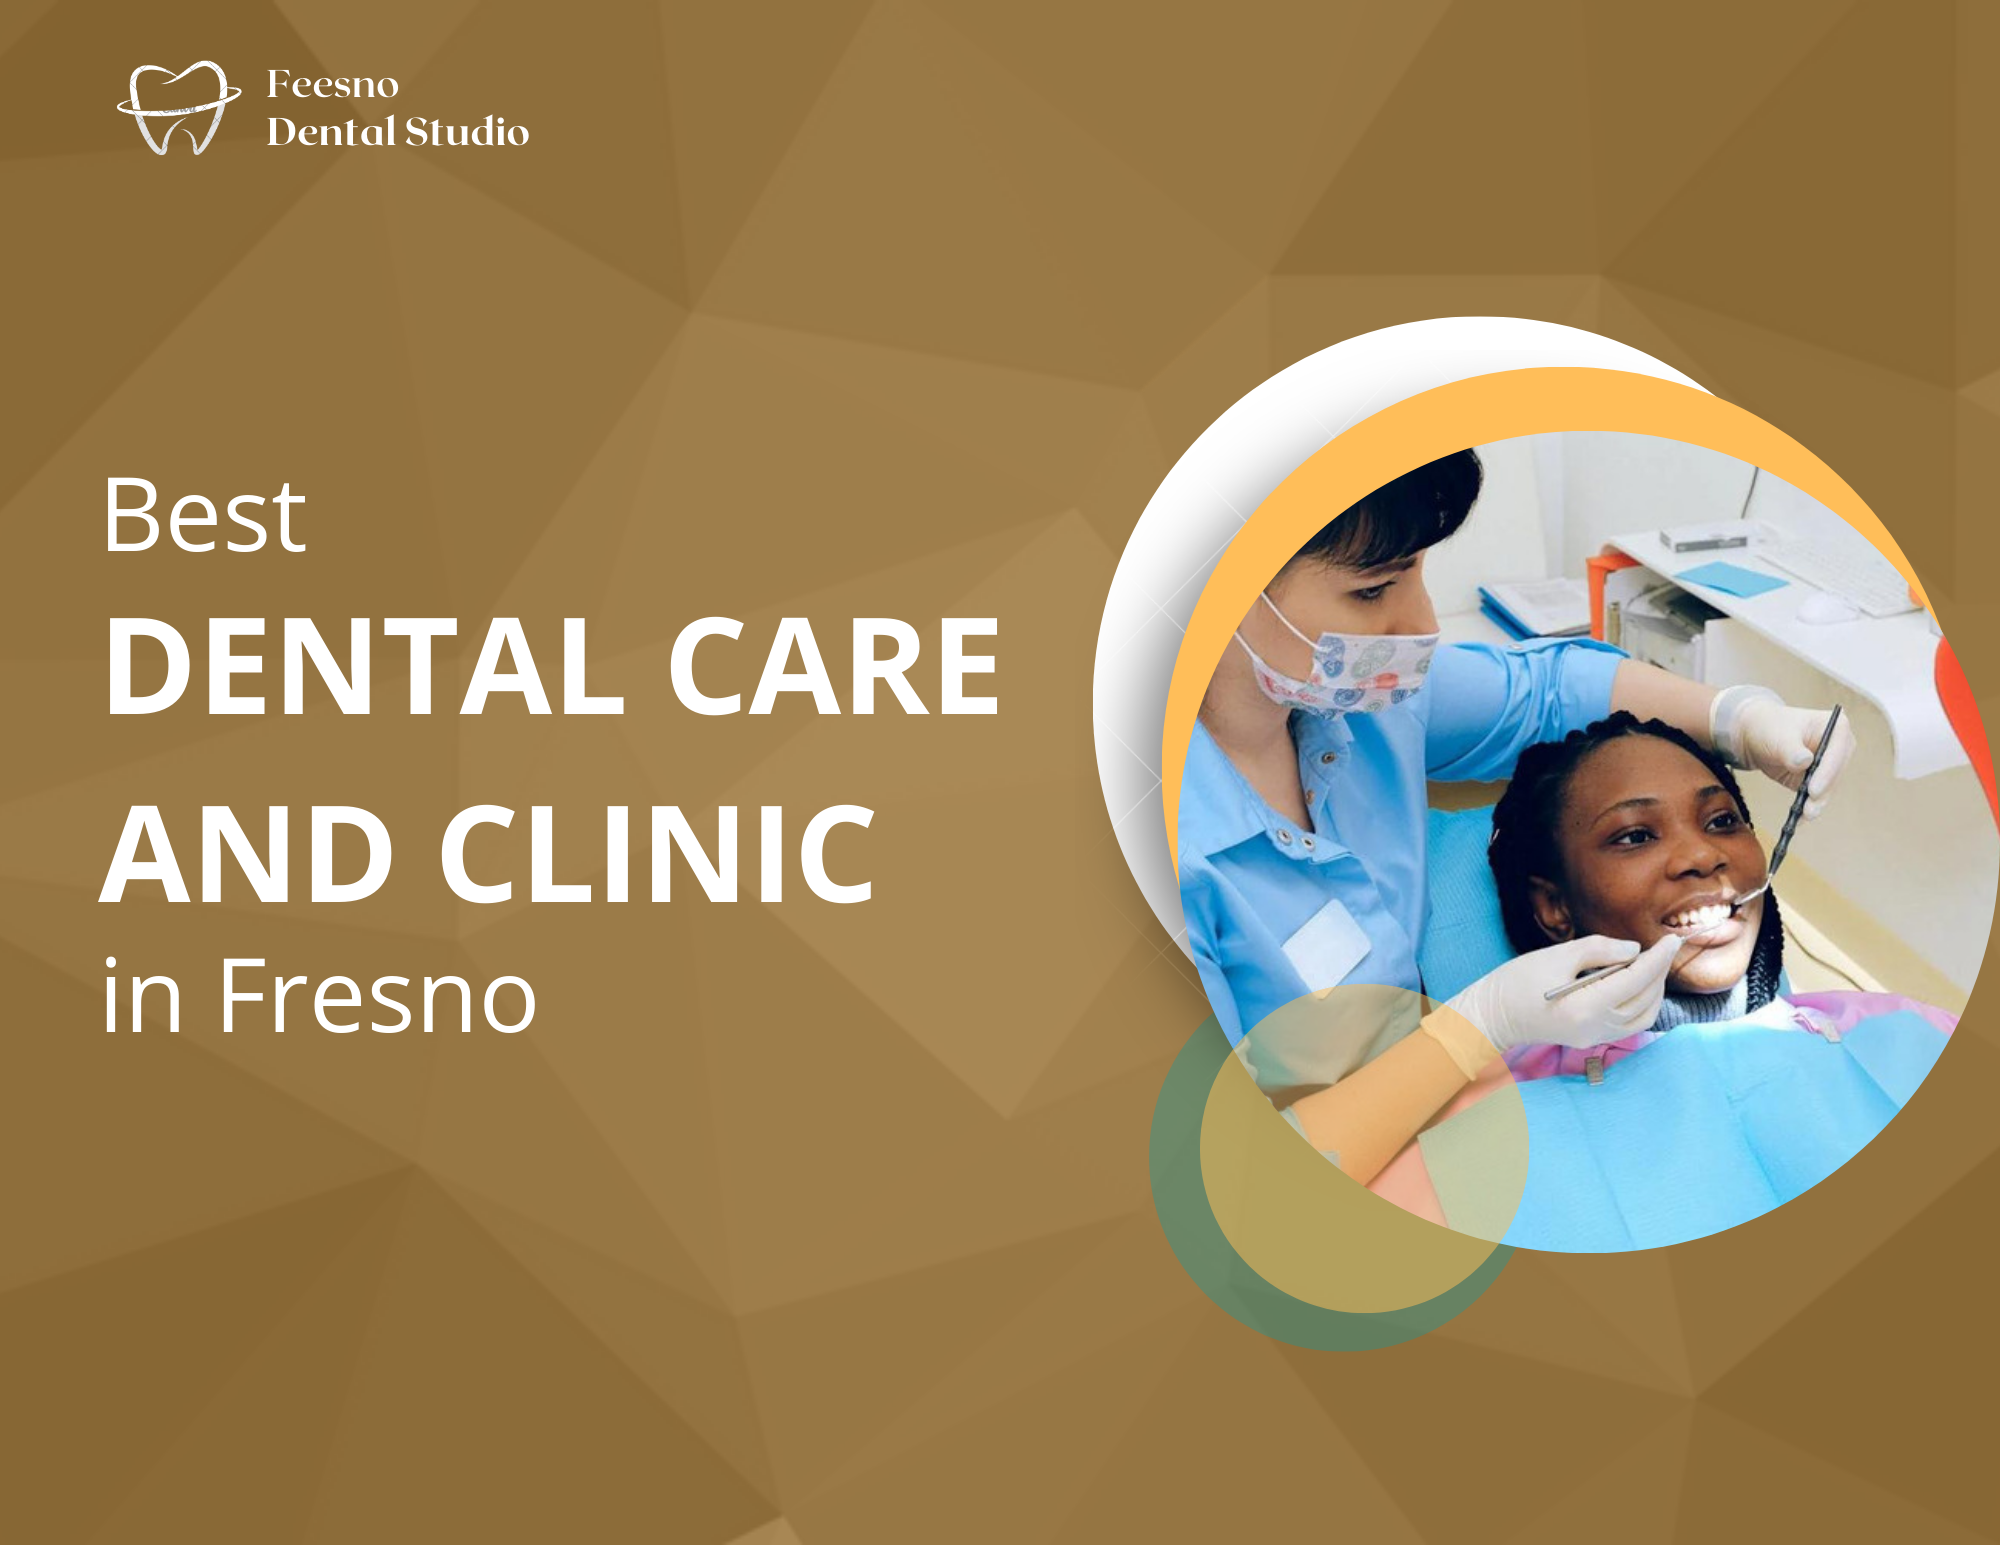 Best Dental clinics and dental care in Fresno, CA